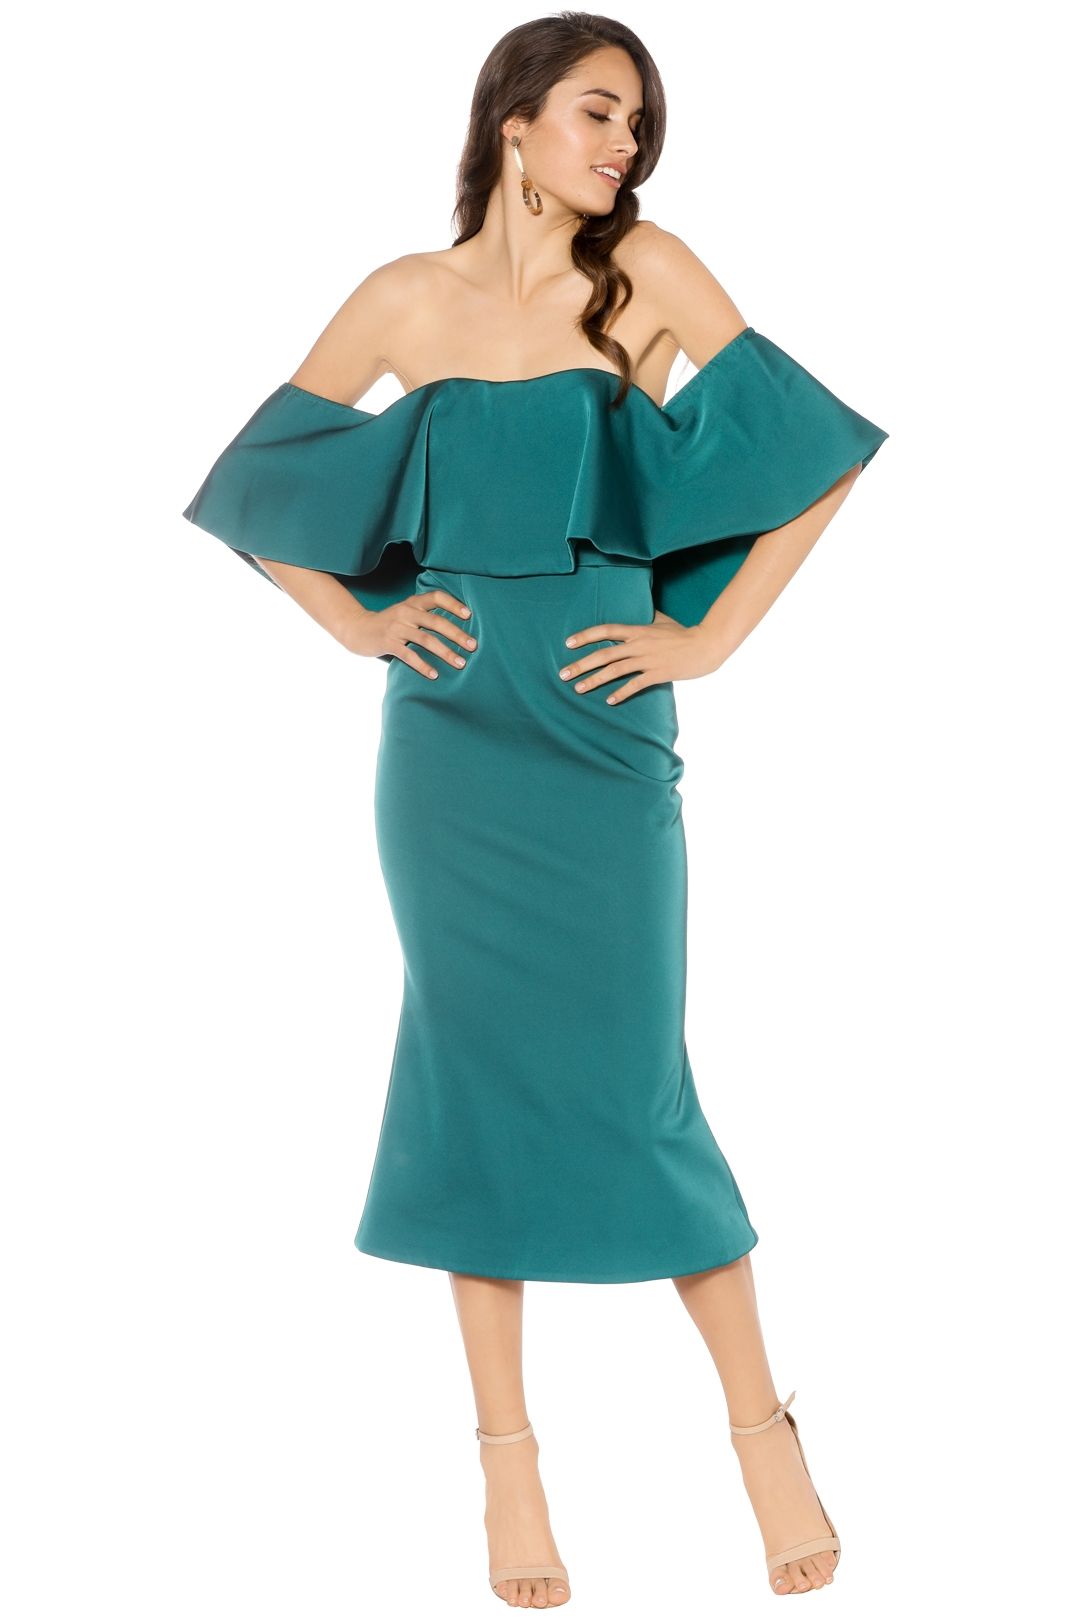 Talulah - Without You Midi - Emerald - Front - Teal